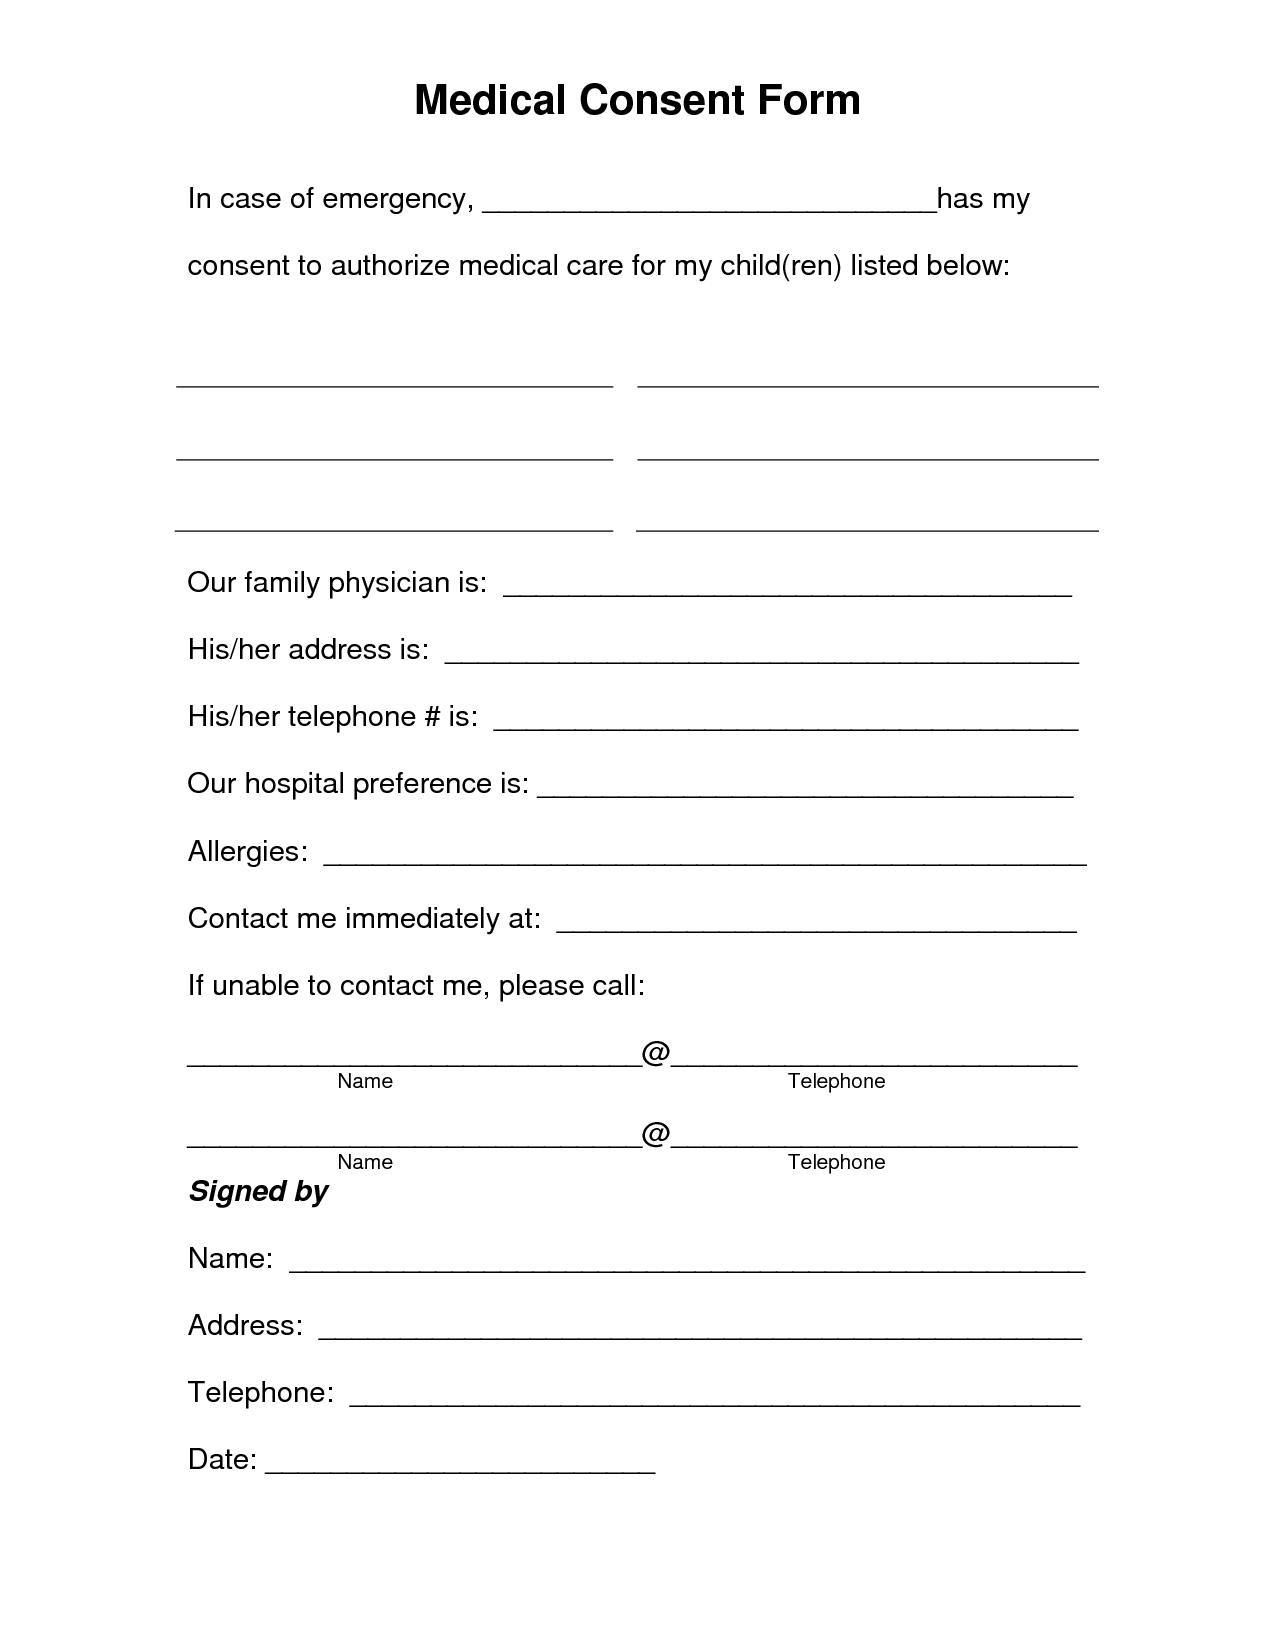 Free Printable Medical Consent Form | Free Medical Consent Form - Free Printable Medical Consent Form